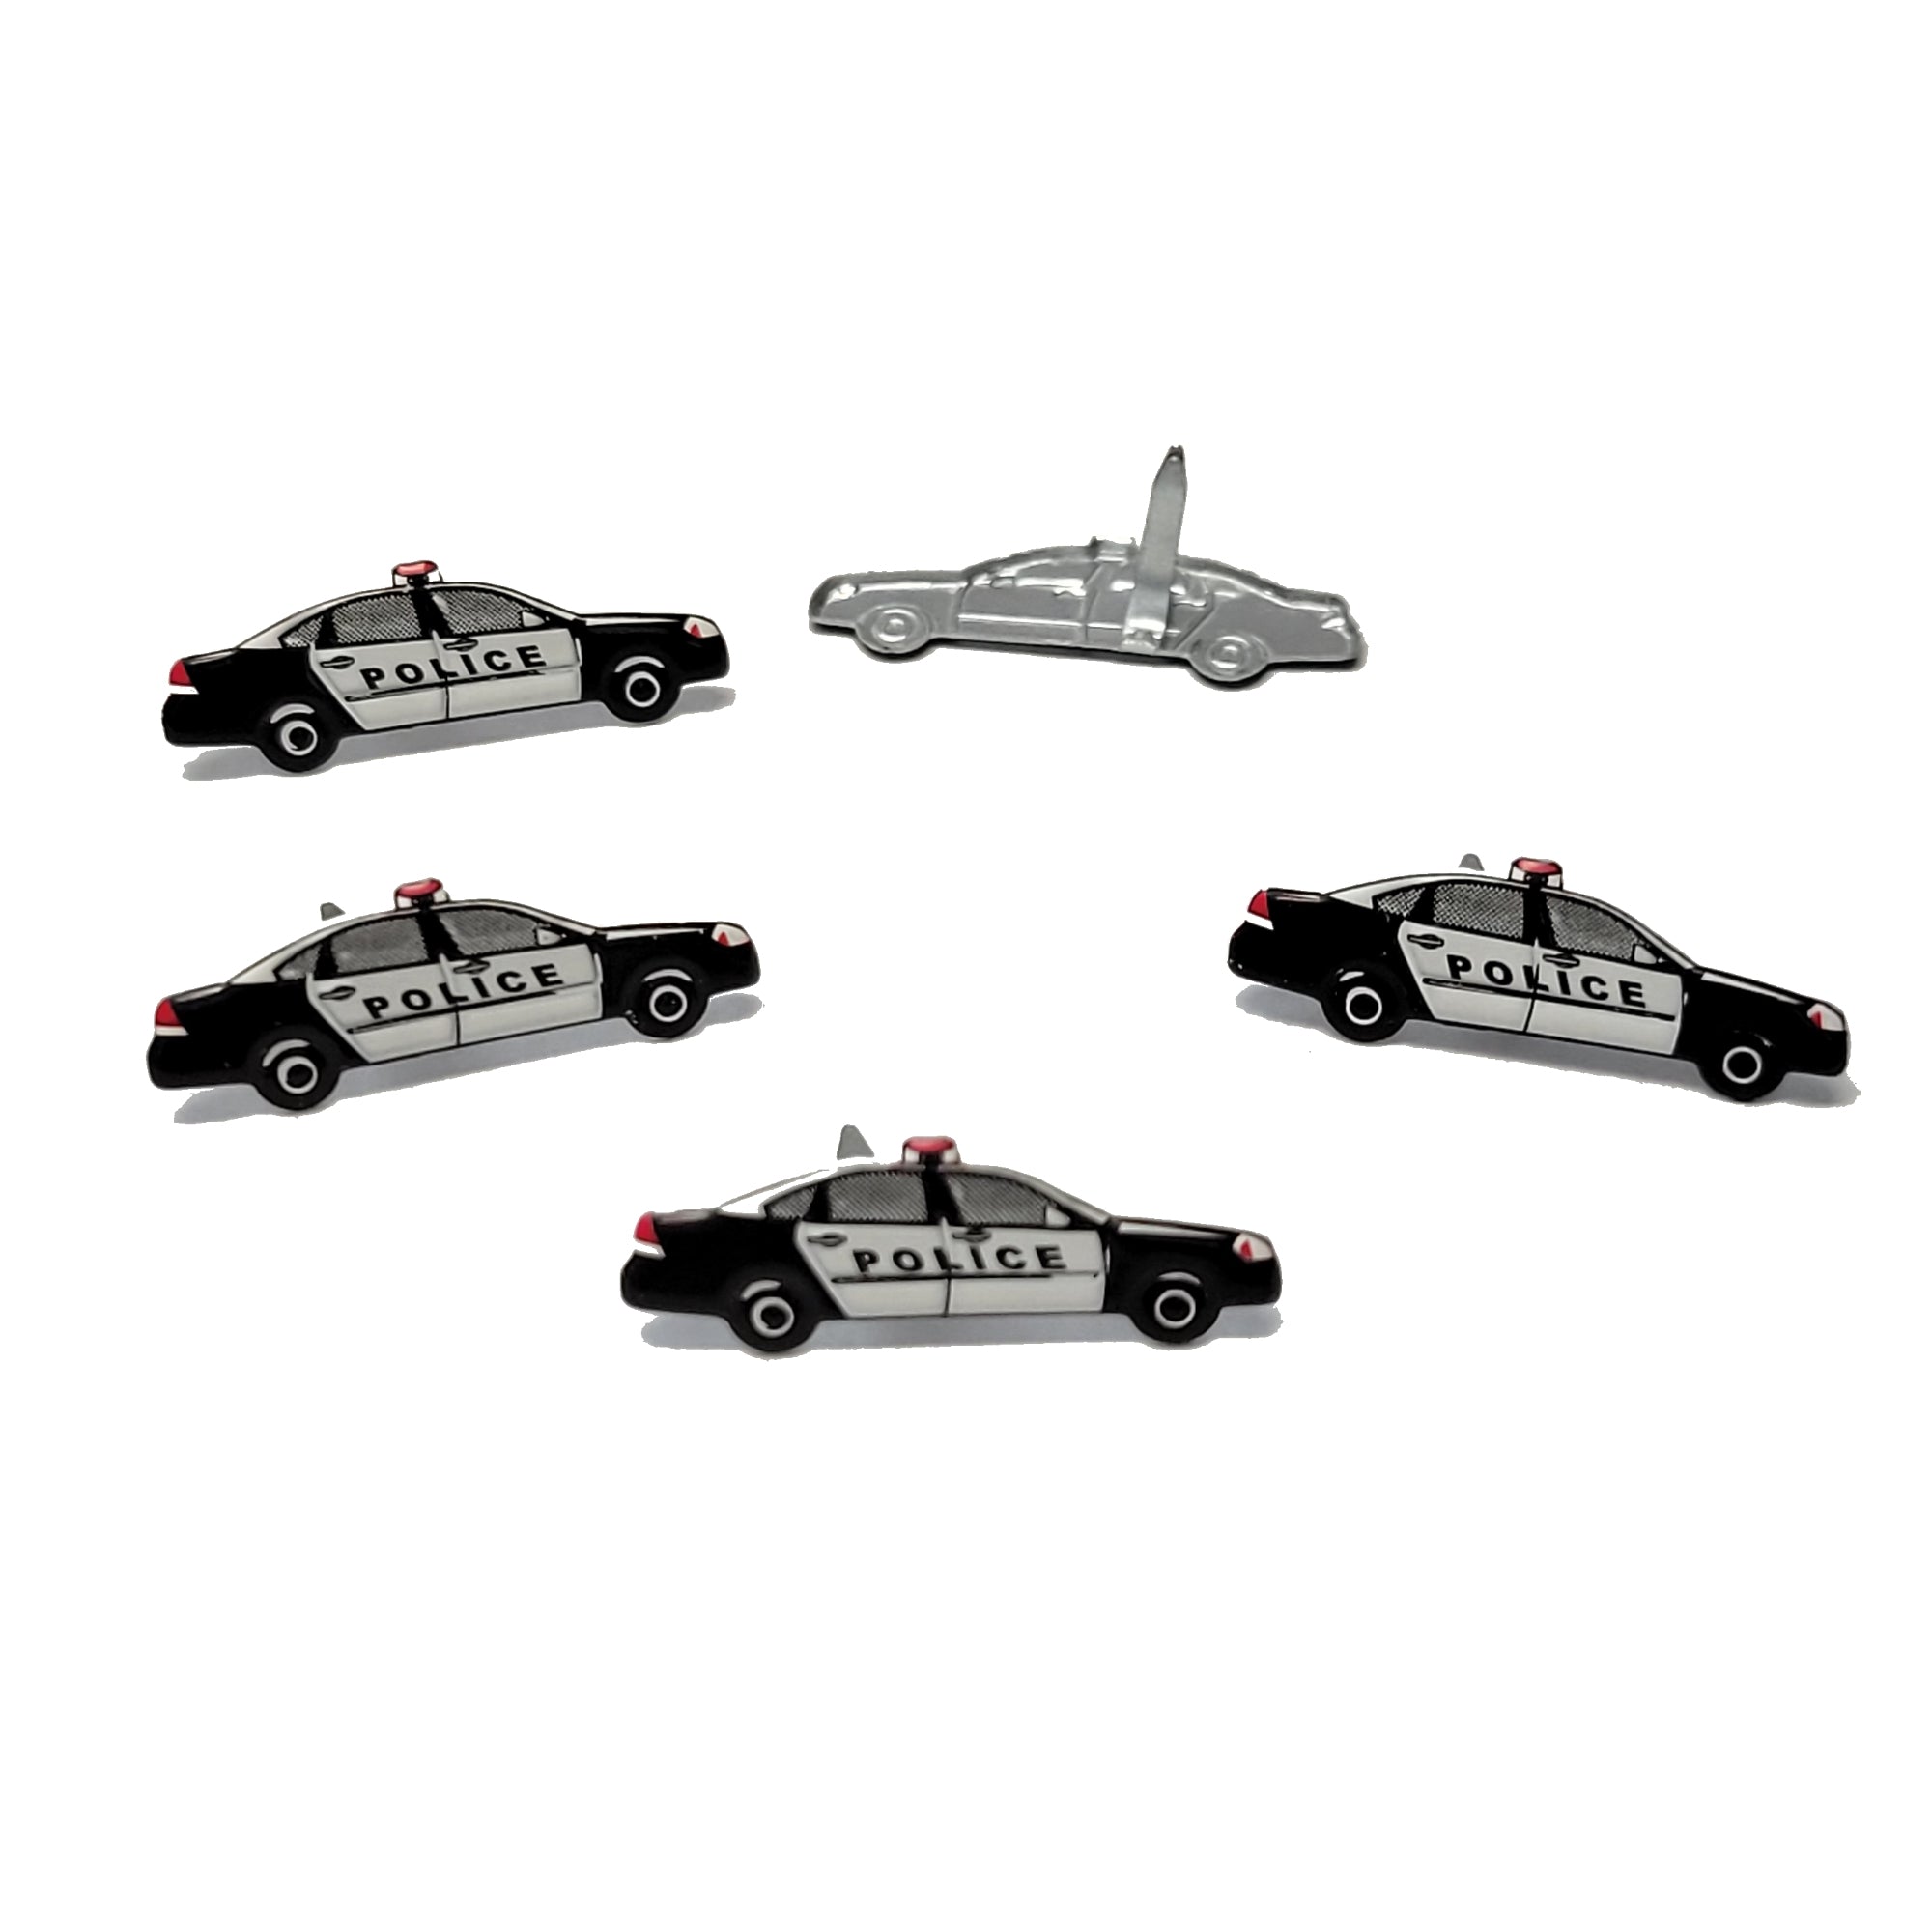 Occupation Collection Police Car Scrapbook Brads by Eyelet Outlet - Pkg. of 12